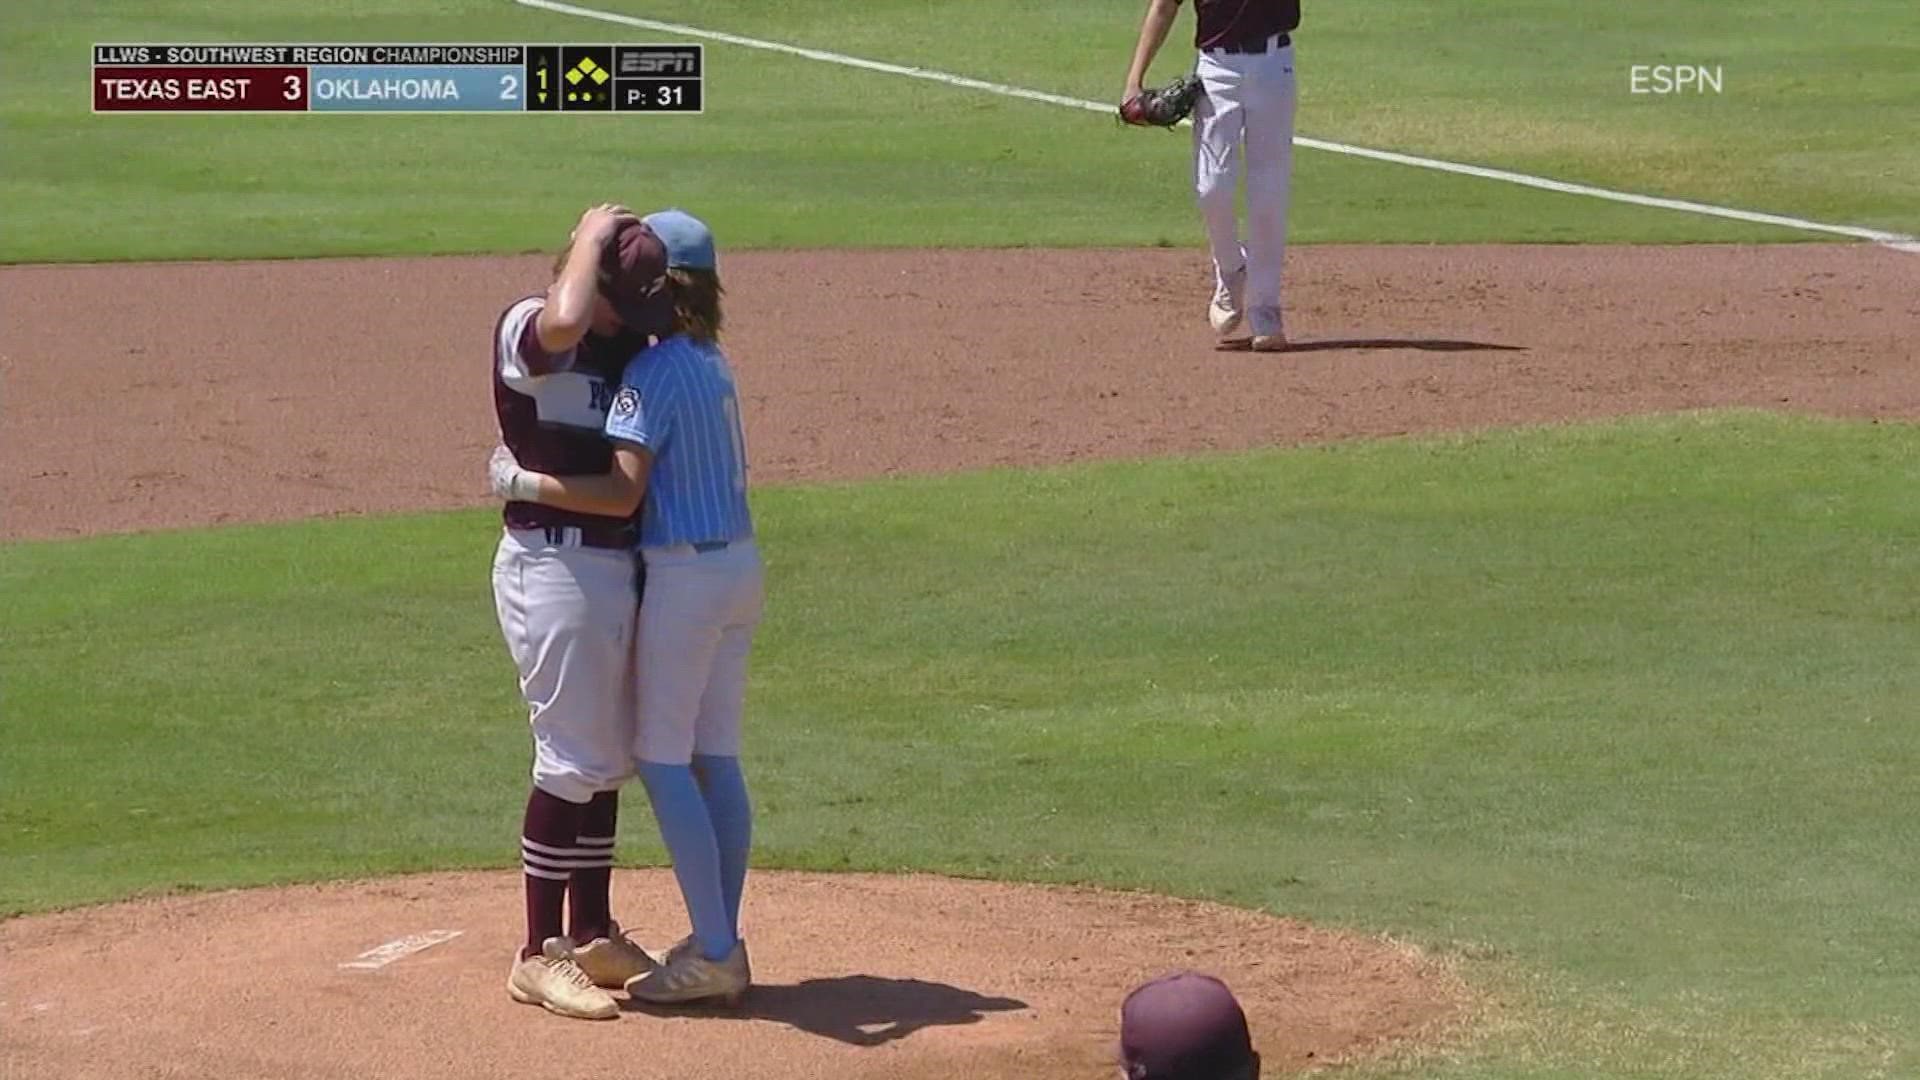 After the errant pitch, Kaiden Shelton stood on the mound, in tears over what happened. Isaiah Jarvis walked over and put his arms around Shelton.